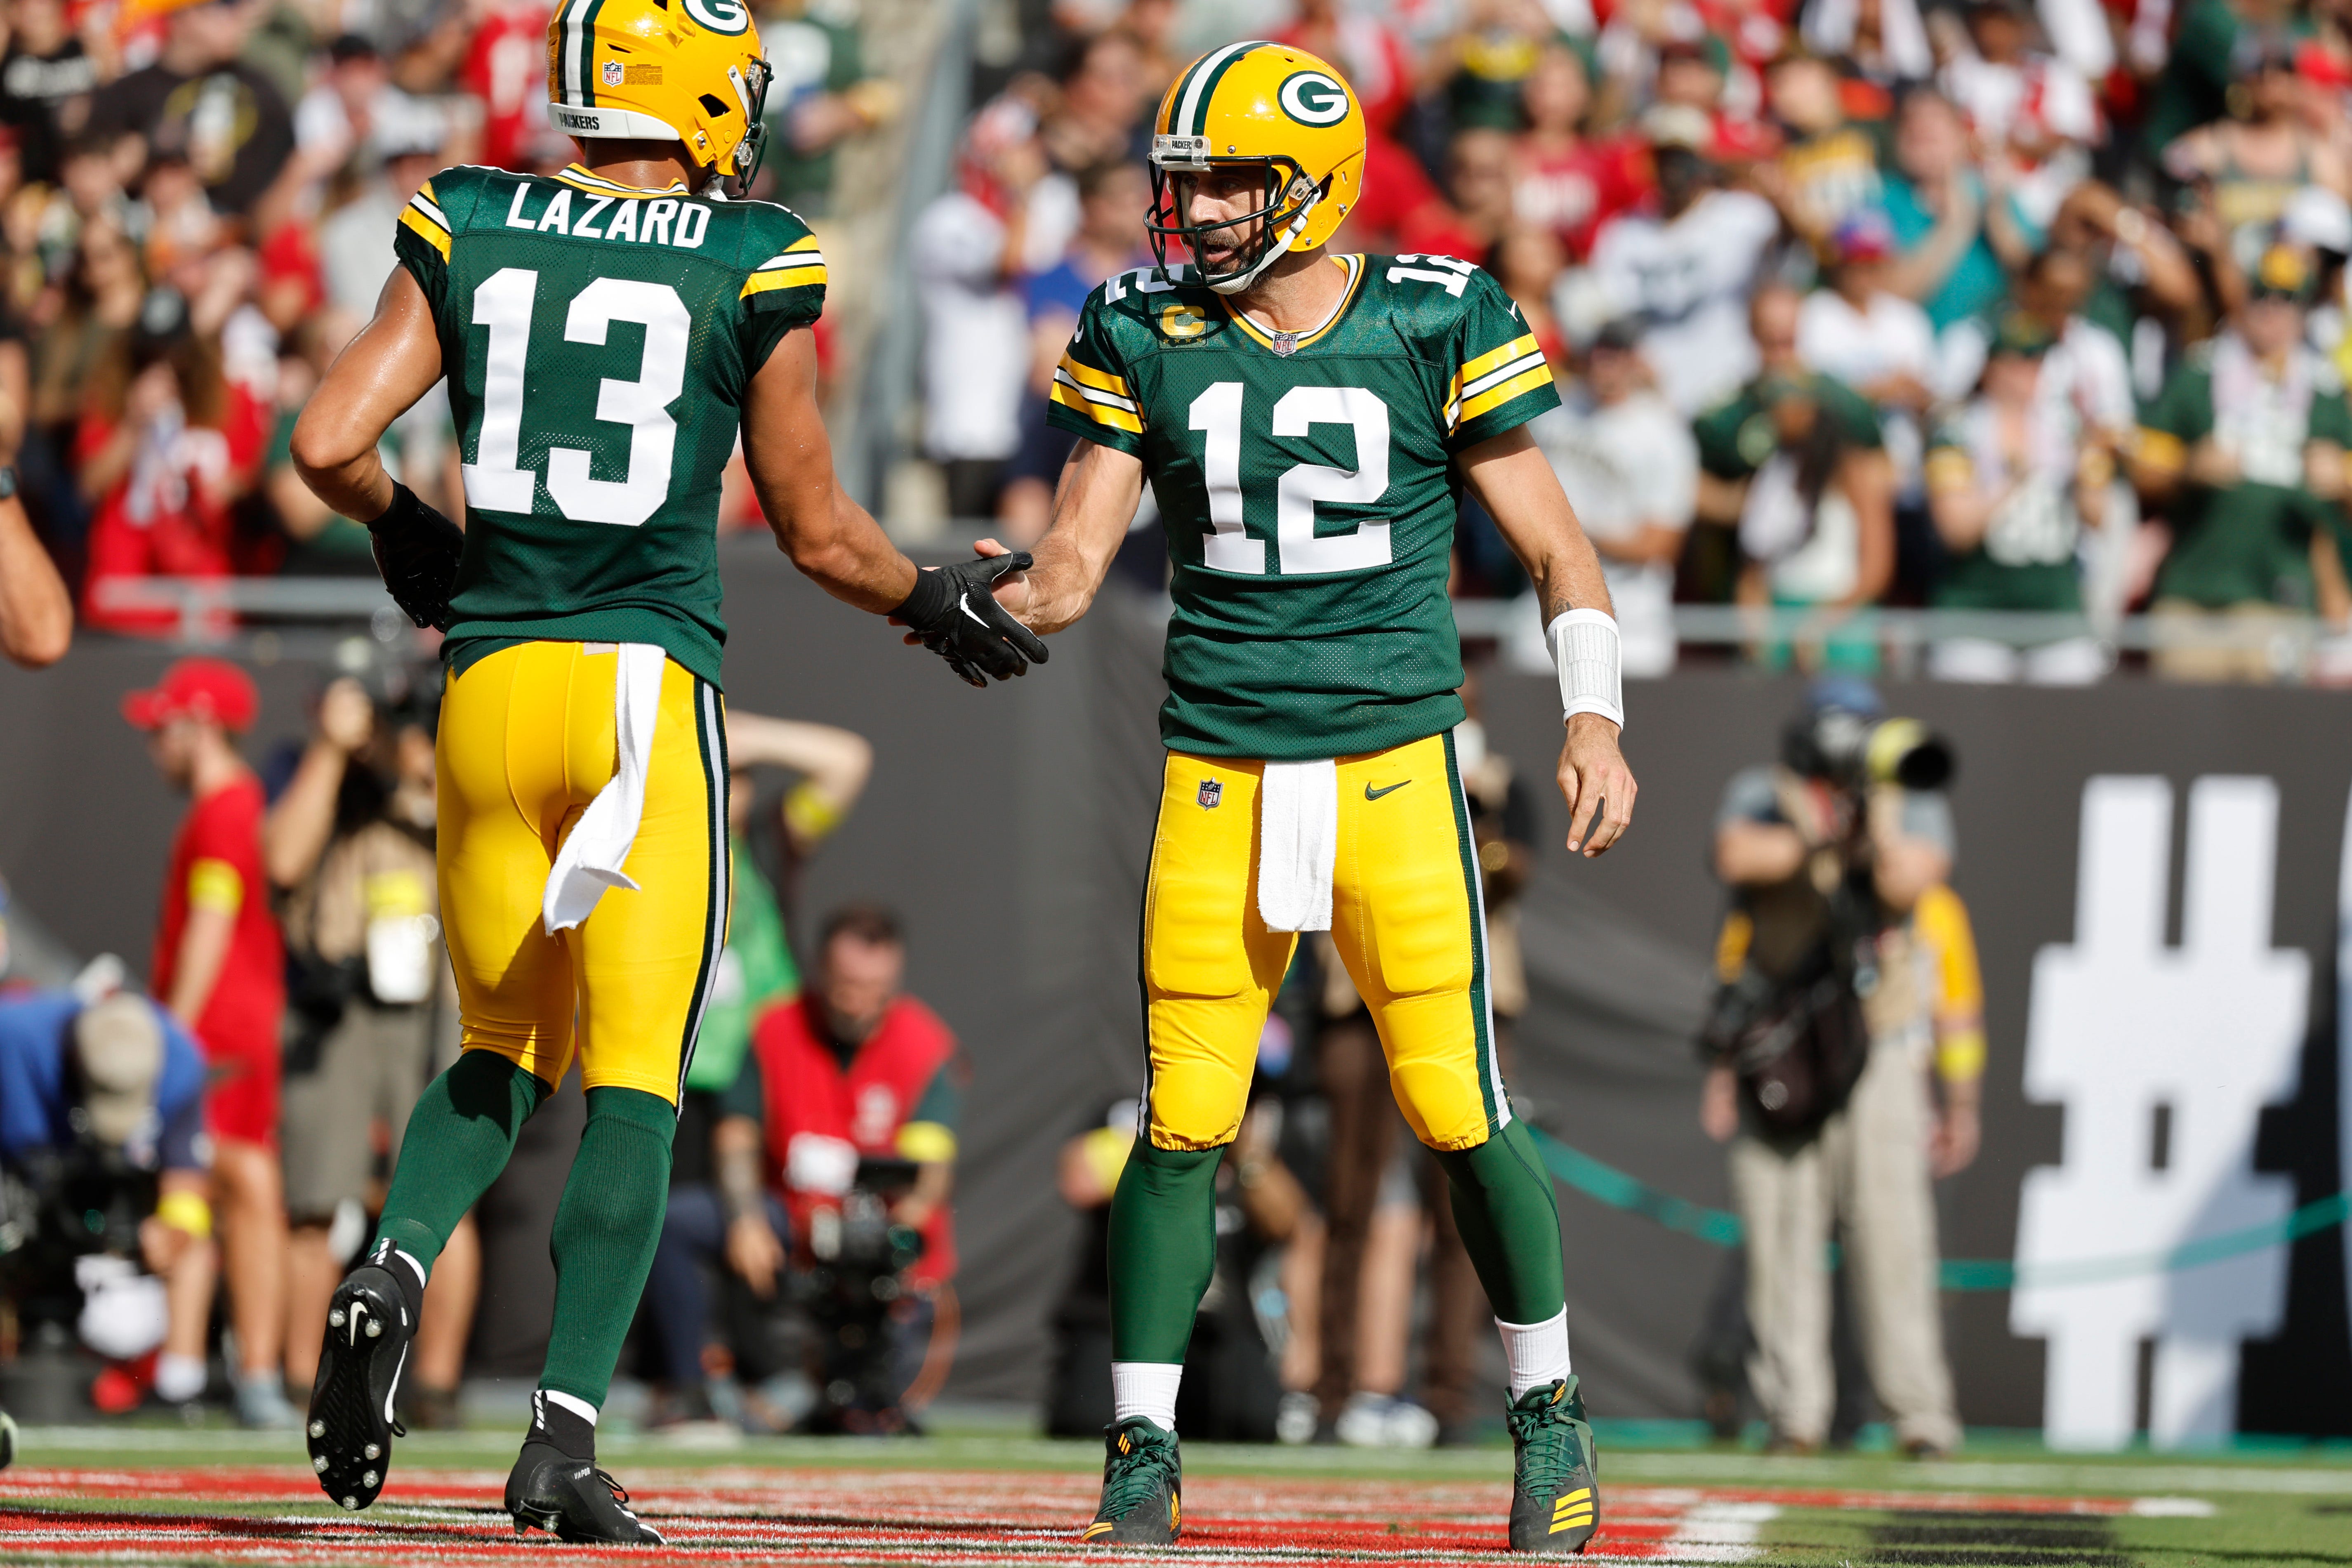 Green Bay Packers quarterback Aaron Rodgers (12) and wide receiver Allen Lazard (13) congratulate each other after a touchdown against the Tampa Bay Buccaneers during the first quarter on Sept. 25, 2022, at Raymond James Stadium in Tampa, Florida.